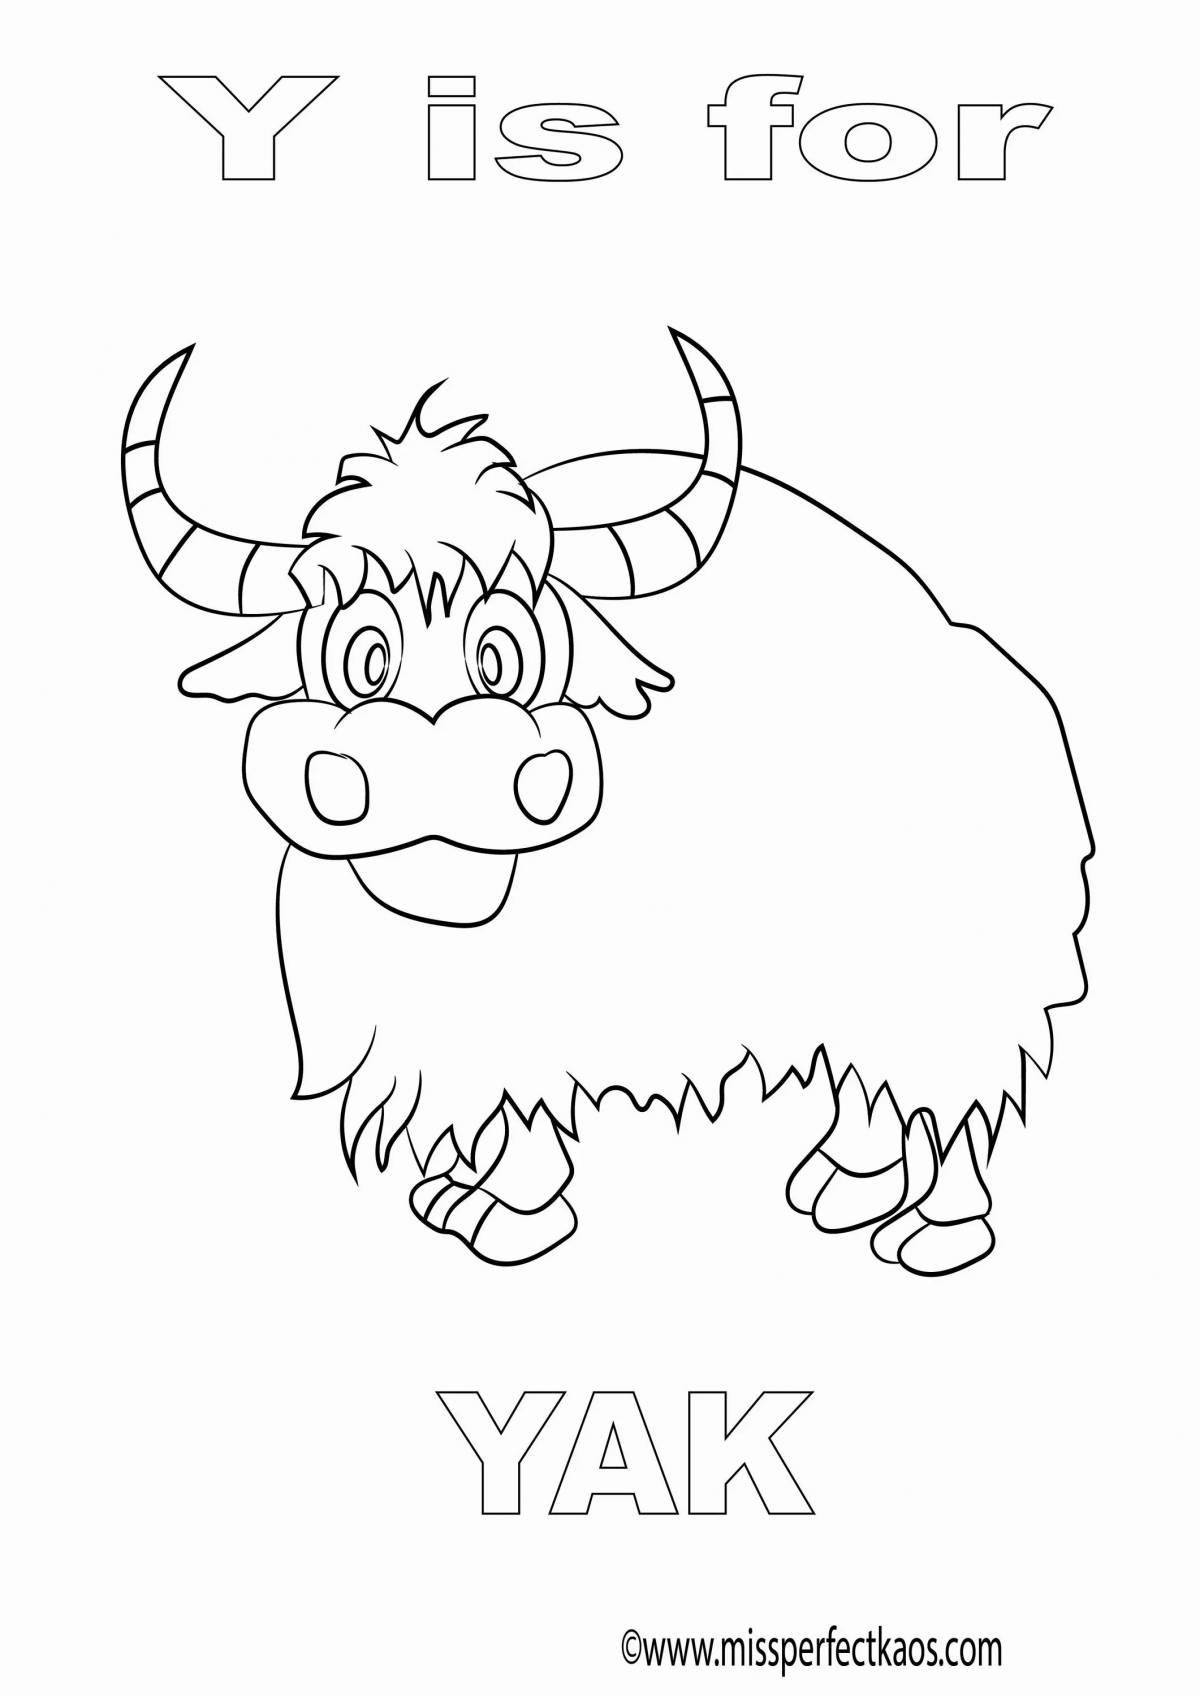 Bright yak coloring page